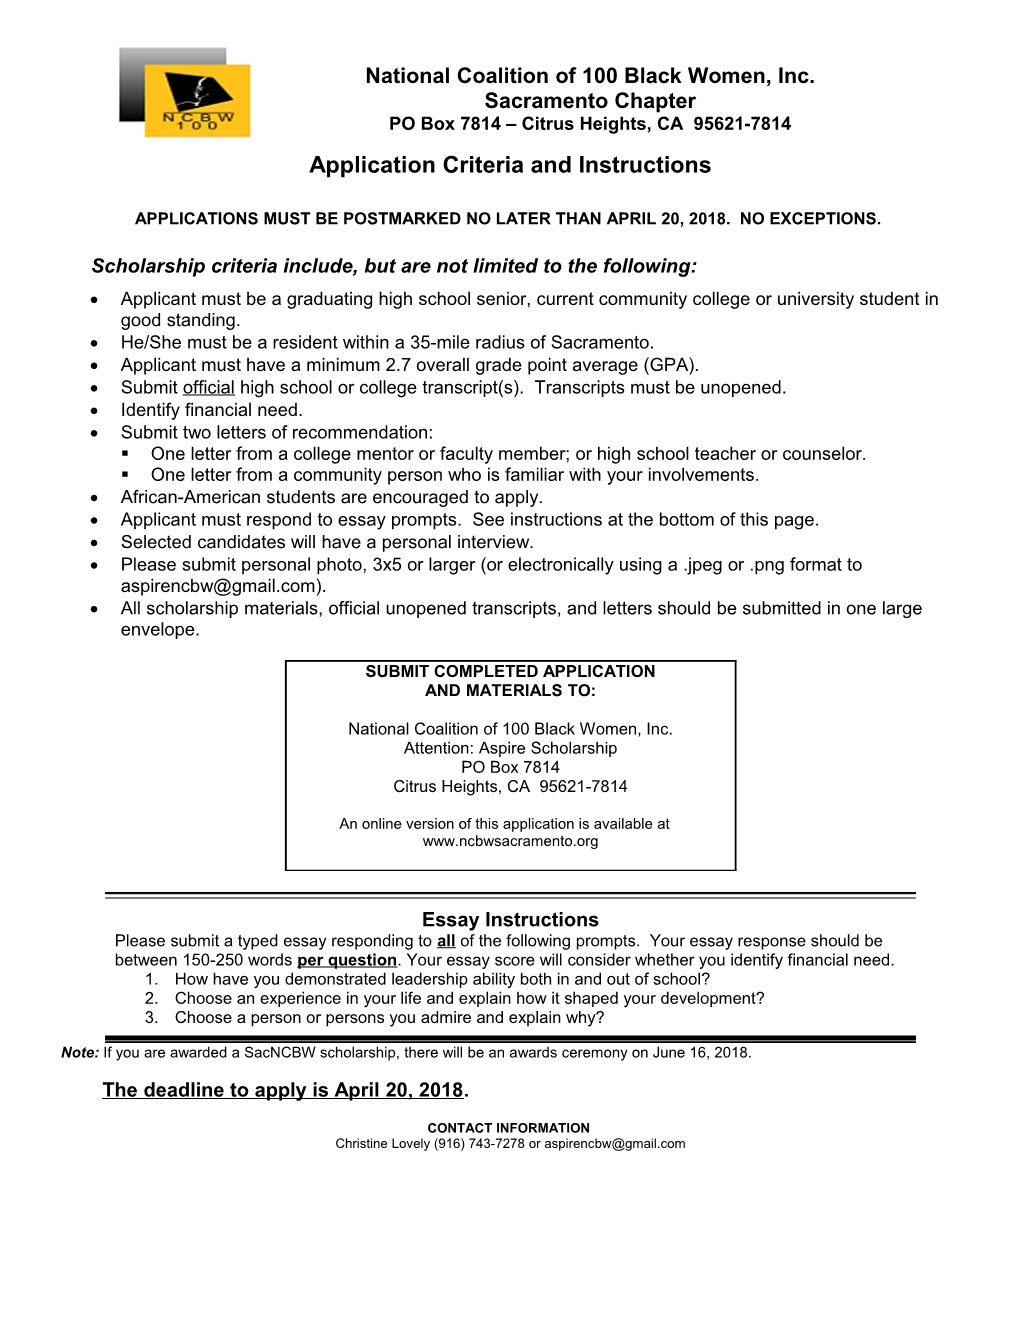 Application Criteria and Instructions